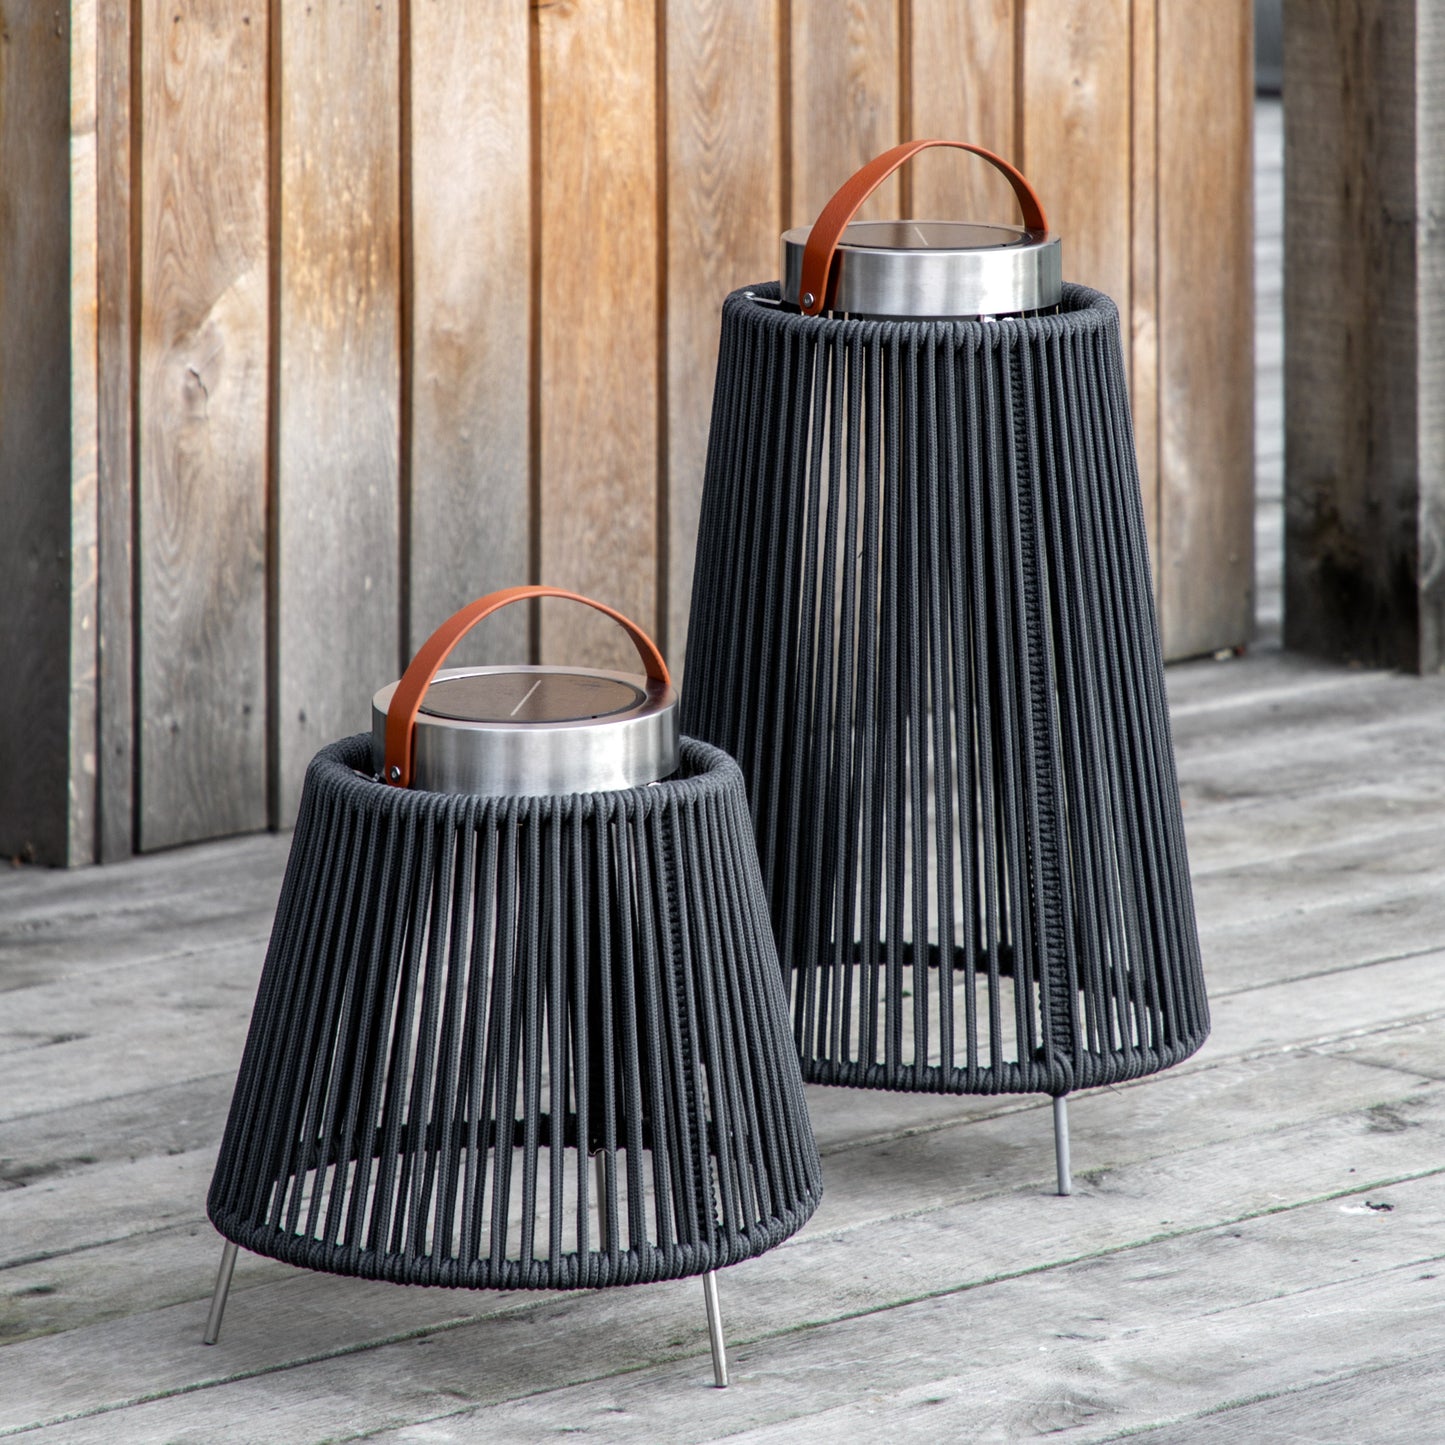 Two Marldon LED Solar Lantern Small from Kikiathome.co.uk enhance the interior decor of a wooden deck.